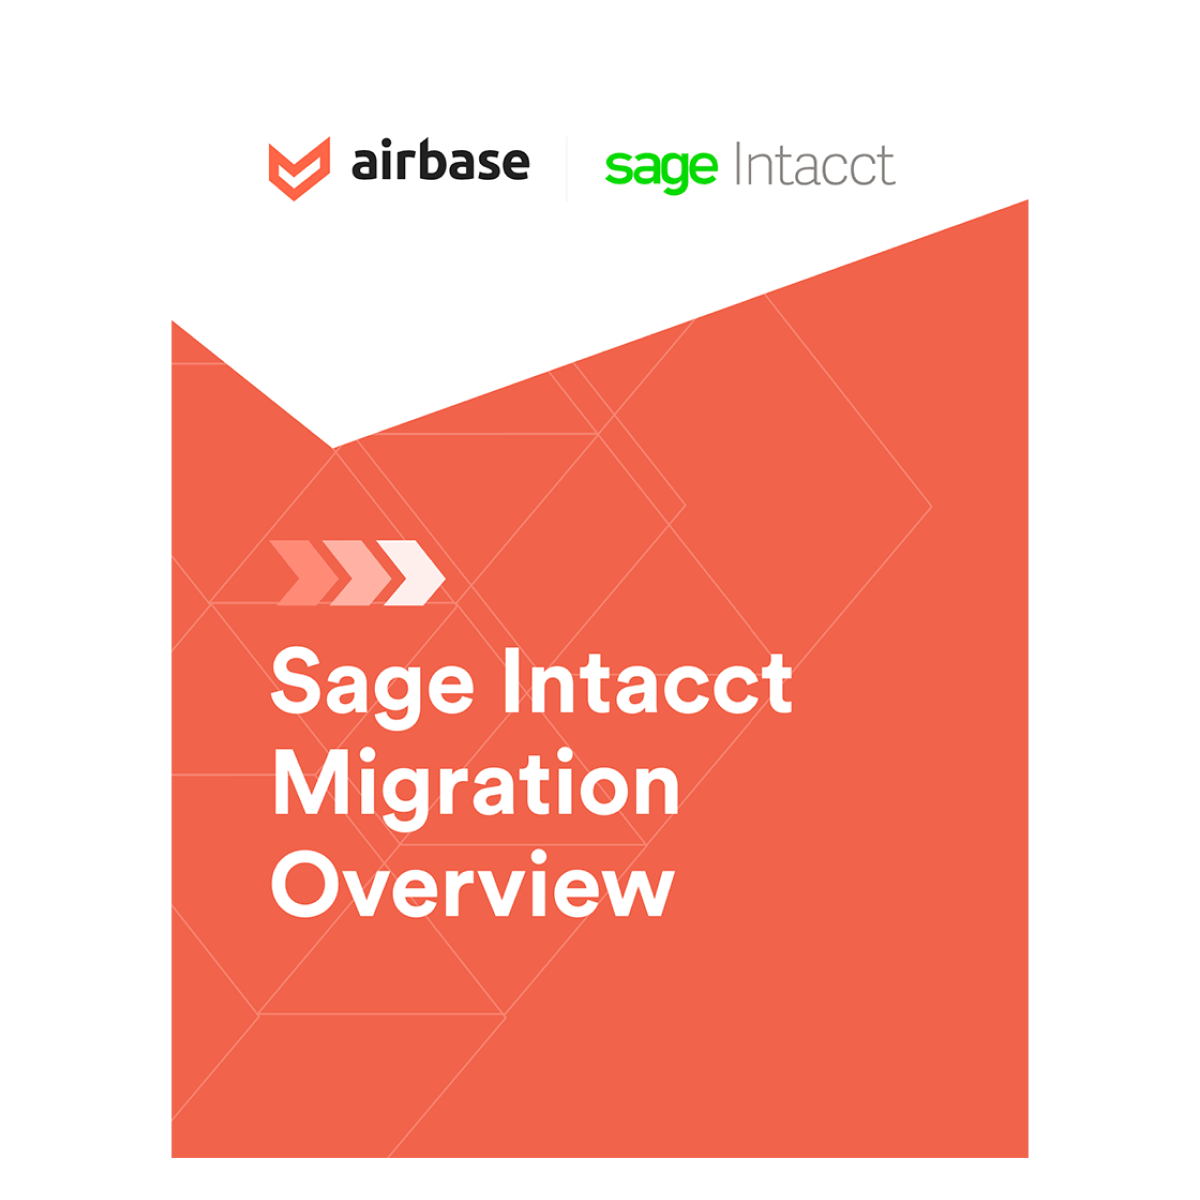 Sage Intacct migration overview and project plan.